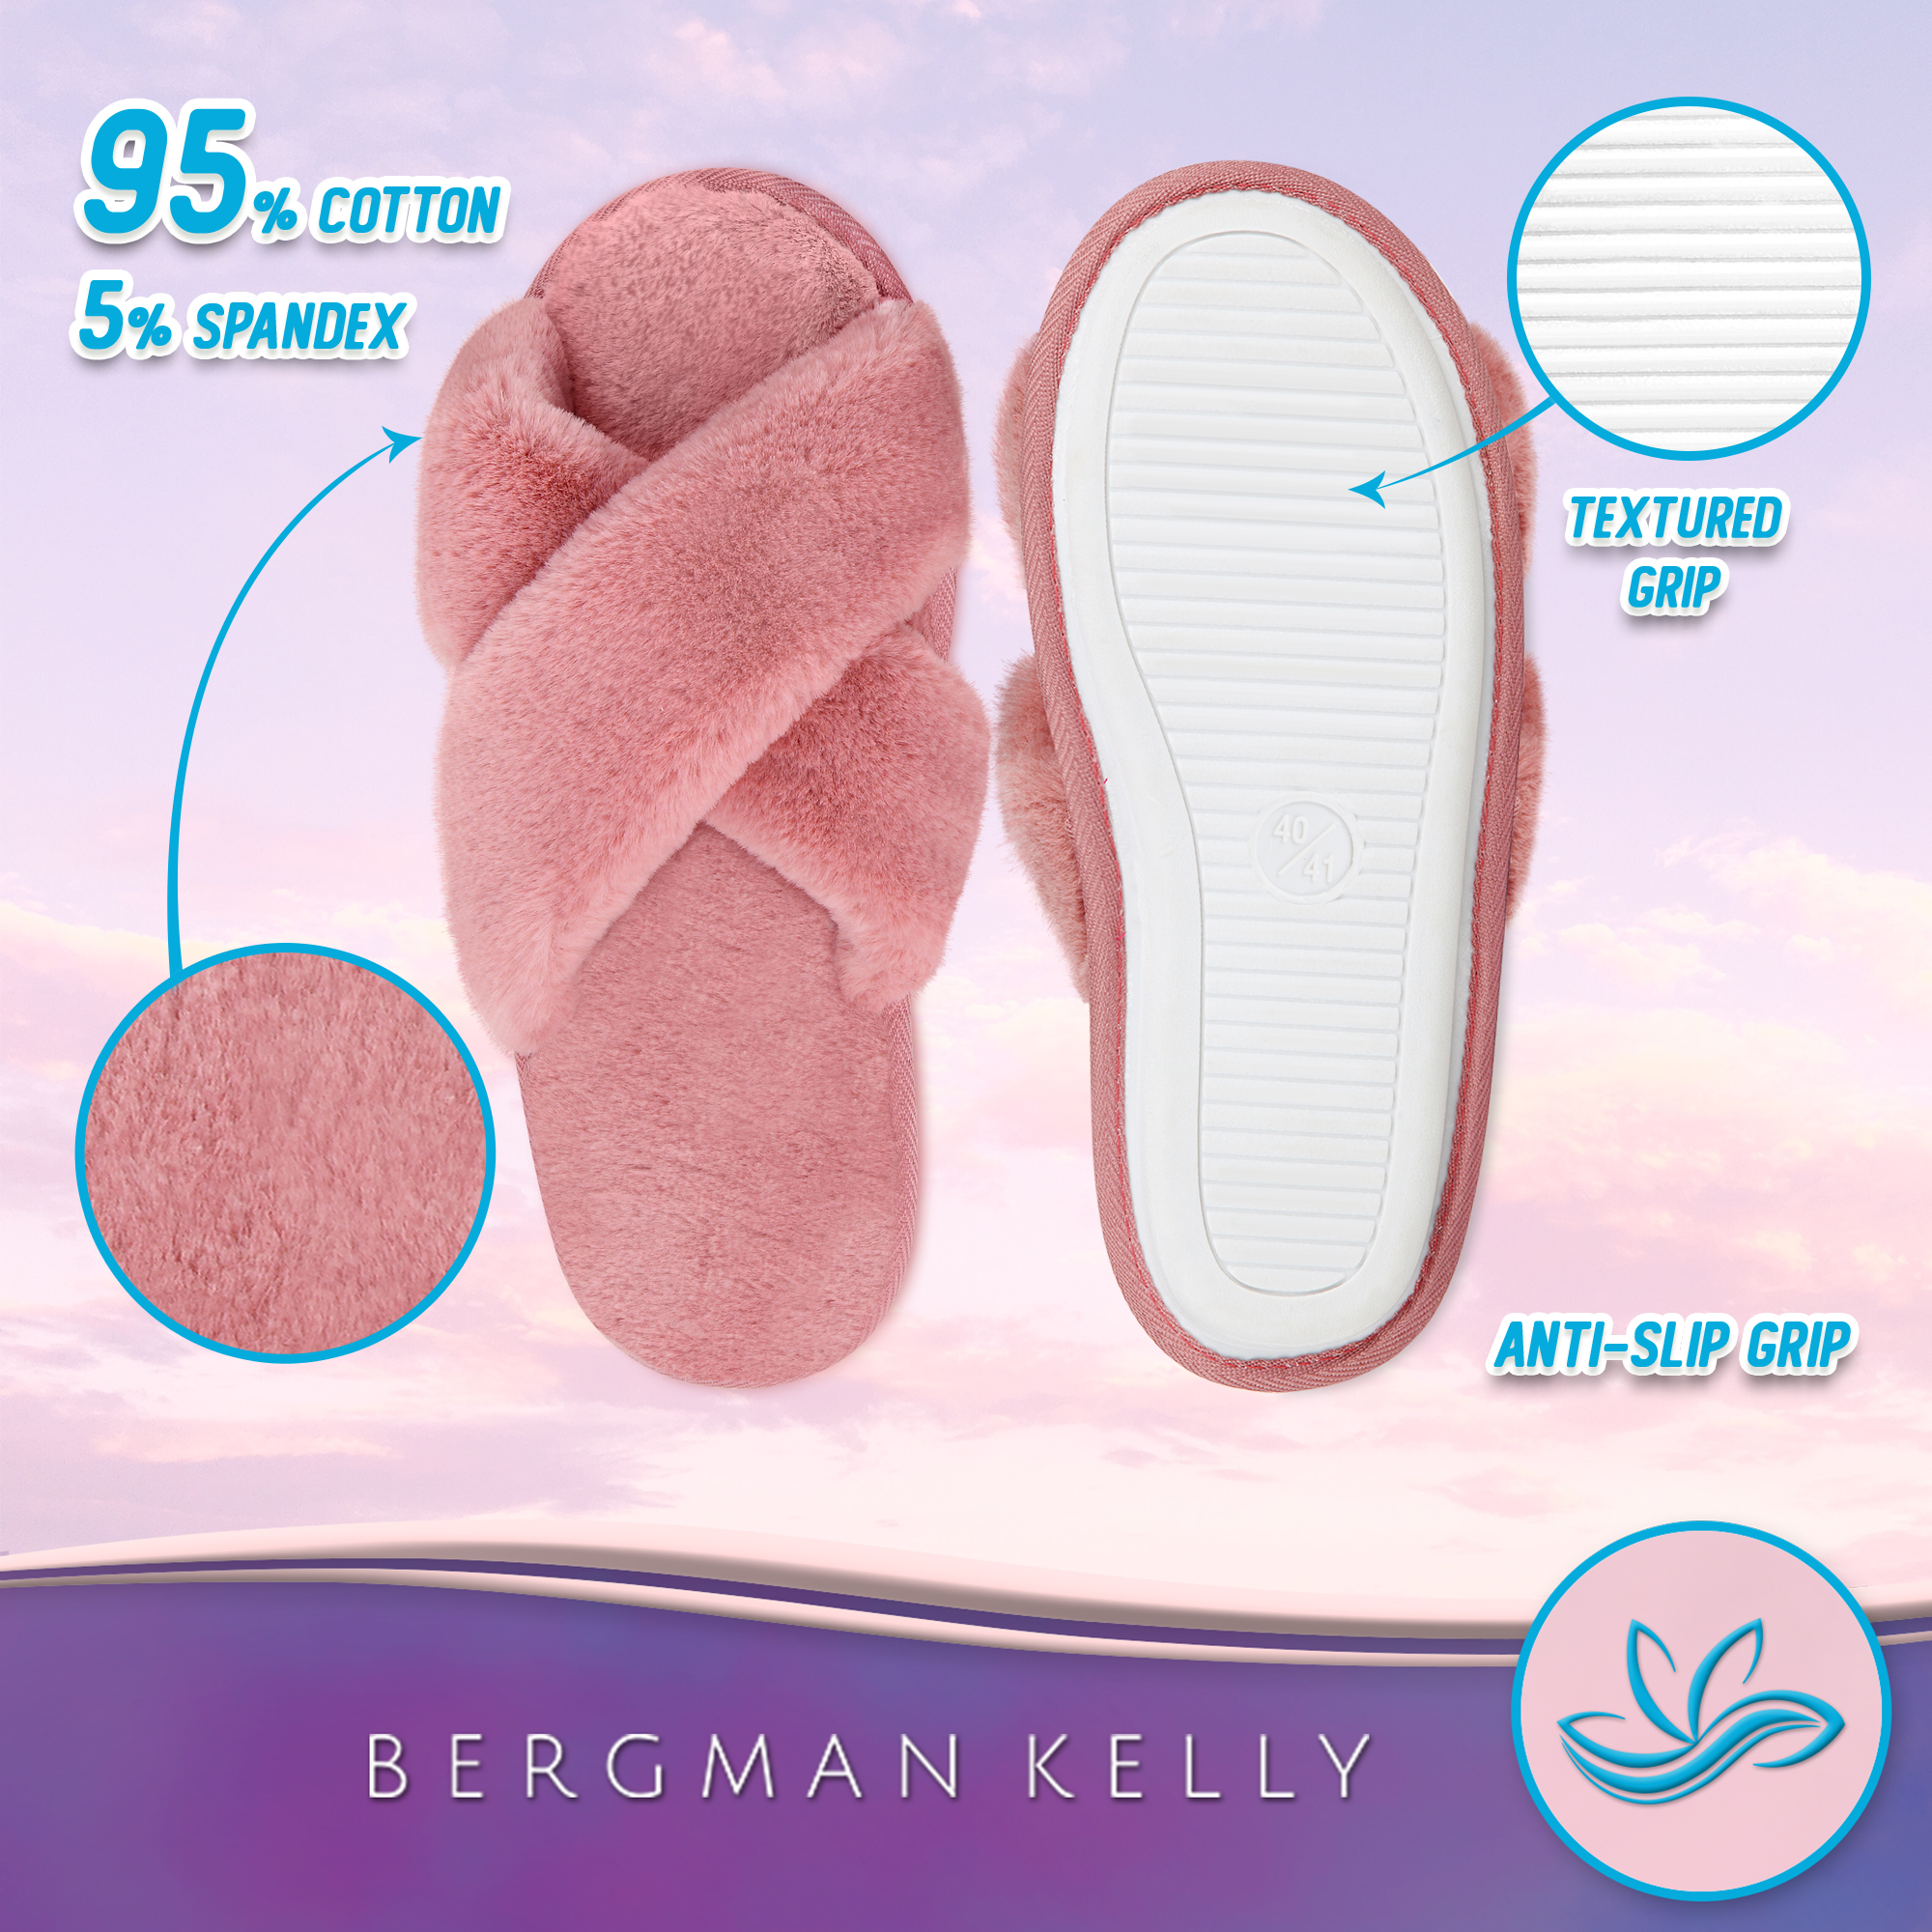 Bergman Kelly Open Toe Slippers for Women (Clouds Collection - Scuff Style), US Company - image 3 of 9